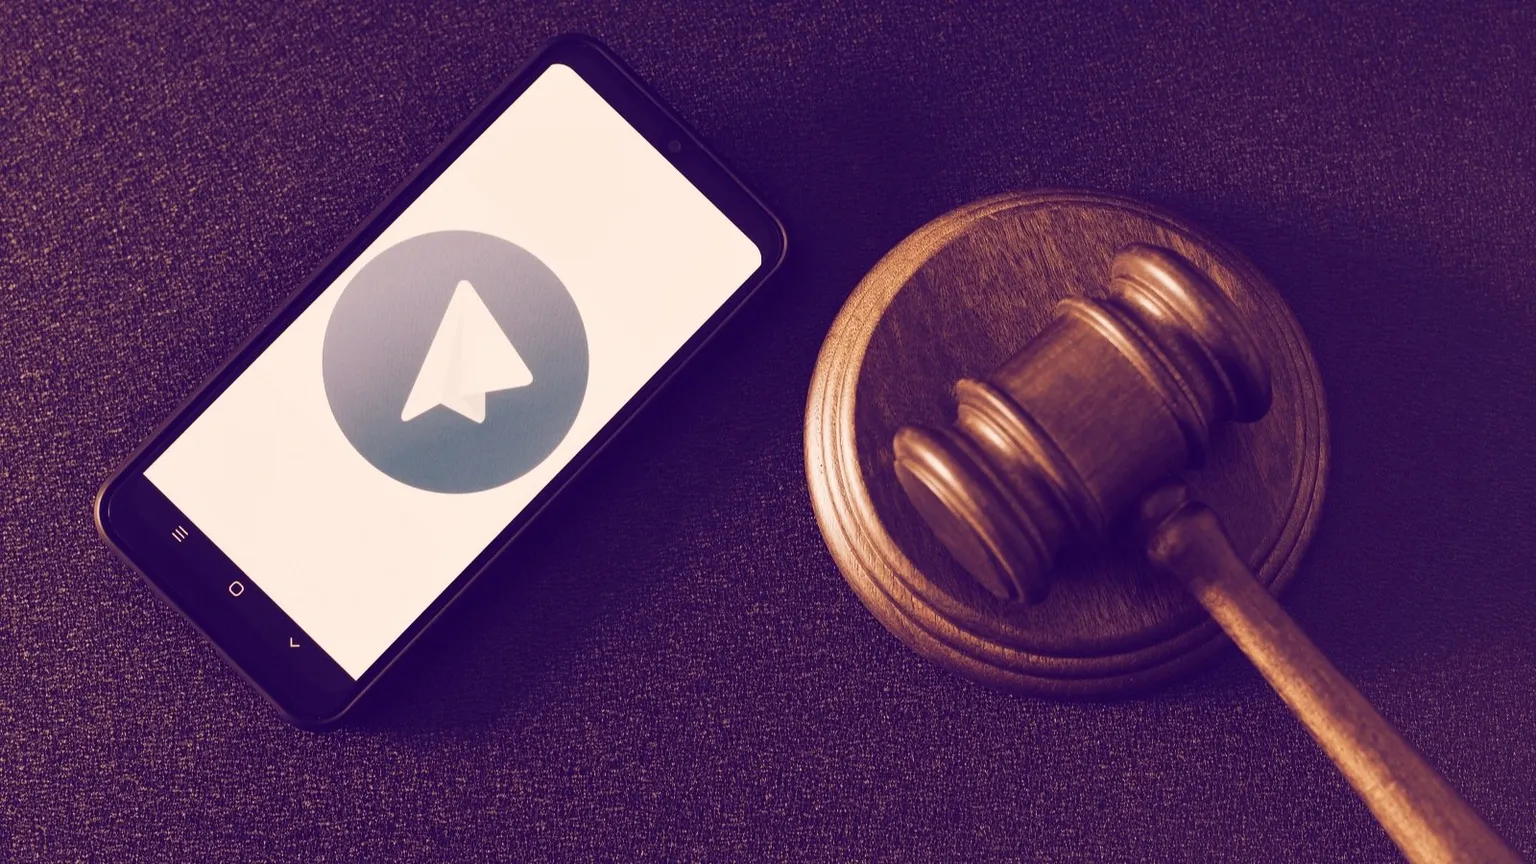 Telegram ordered to pay $620,000 in legal costs following failed lawsuit. Image: Shutterstock